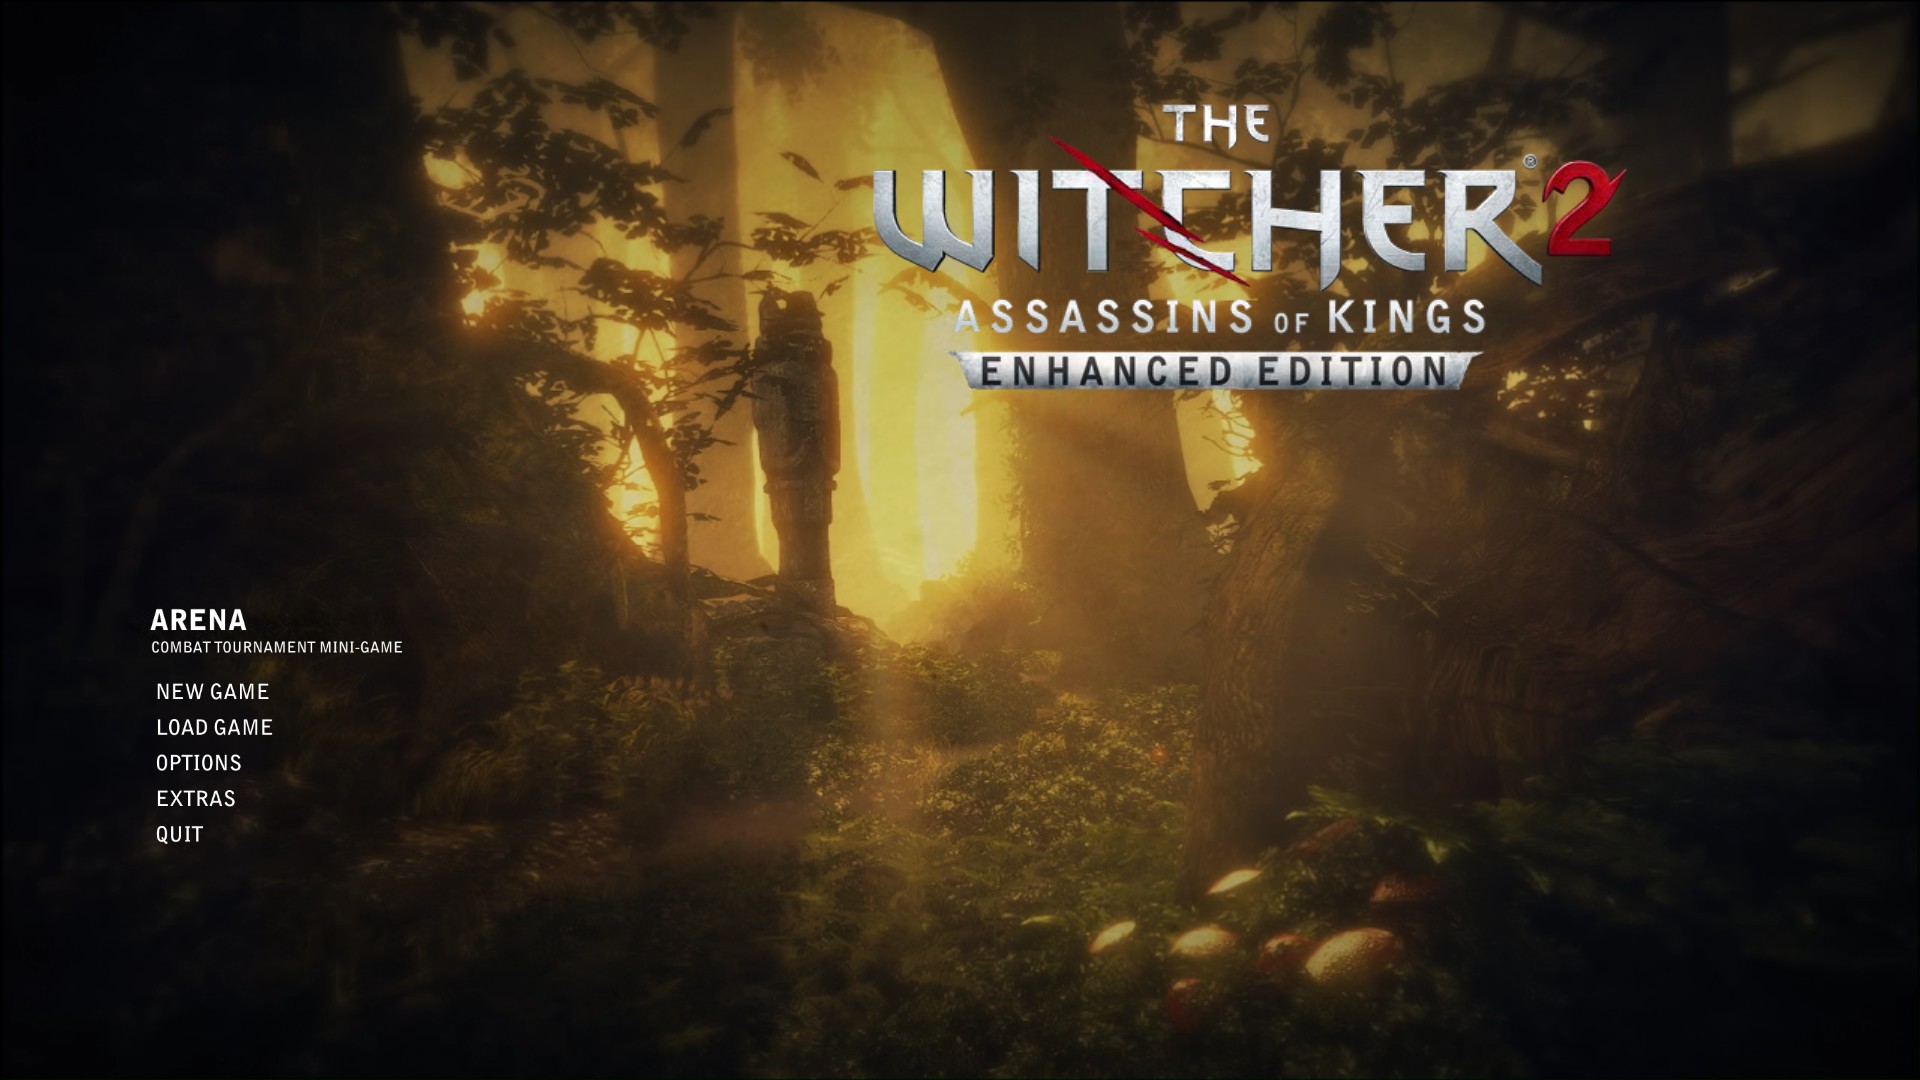 The Witcher 3: Wild Hunt - What to do after beating the game - Other Witcher games - 4BC3ECD